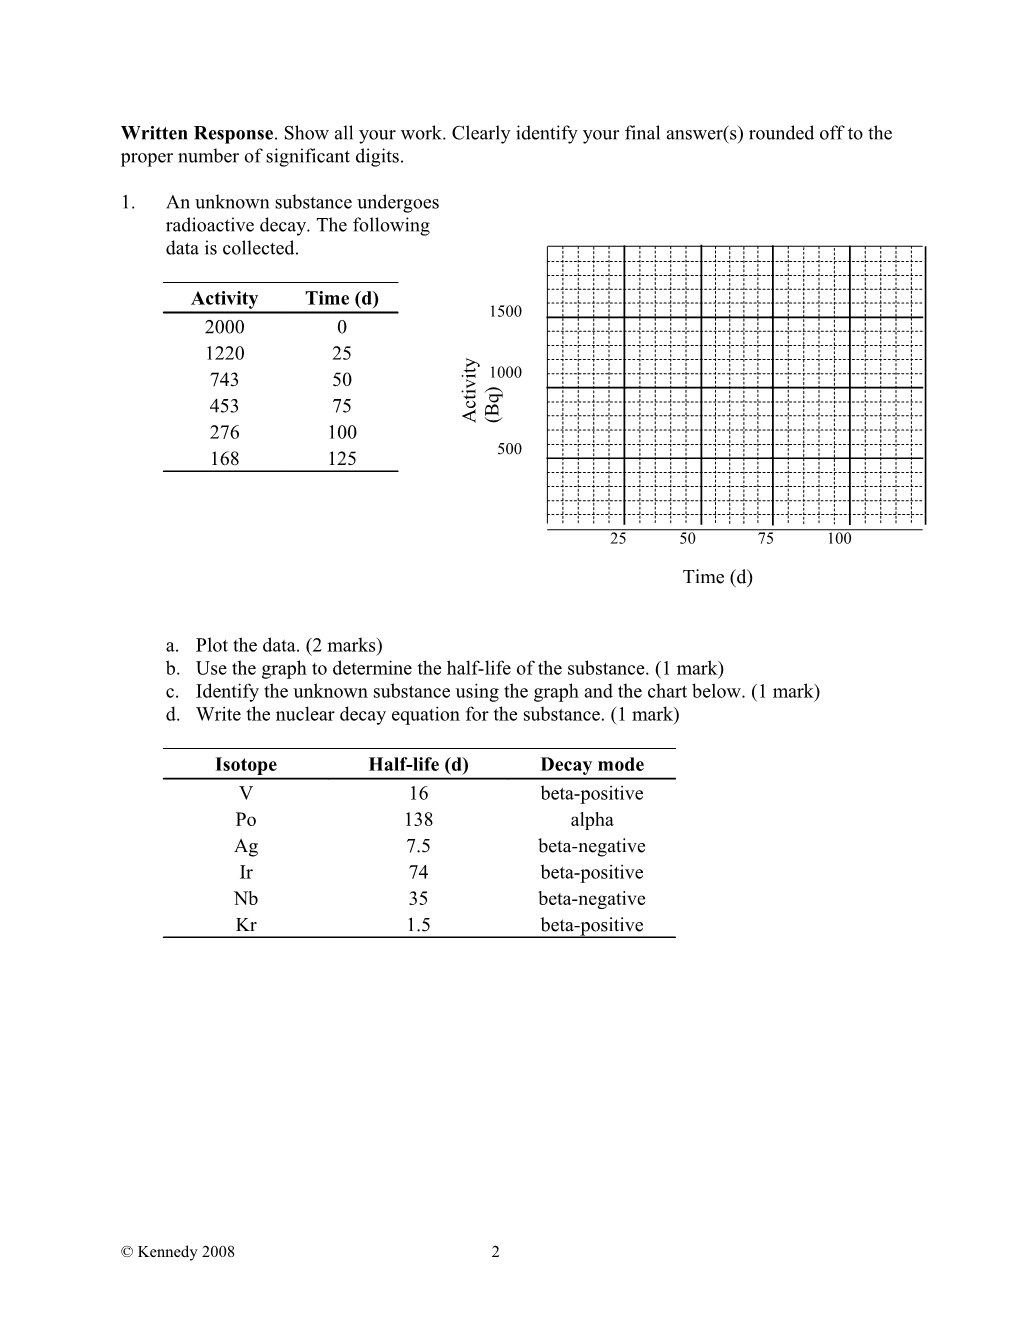 Physics 30: Chapter 8 Exam Nuclear